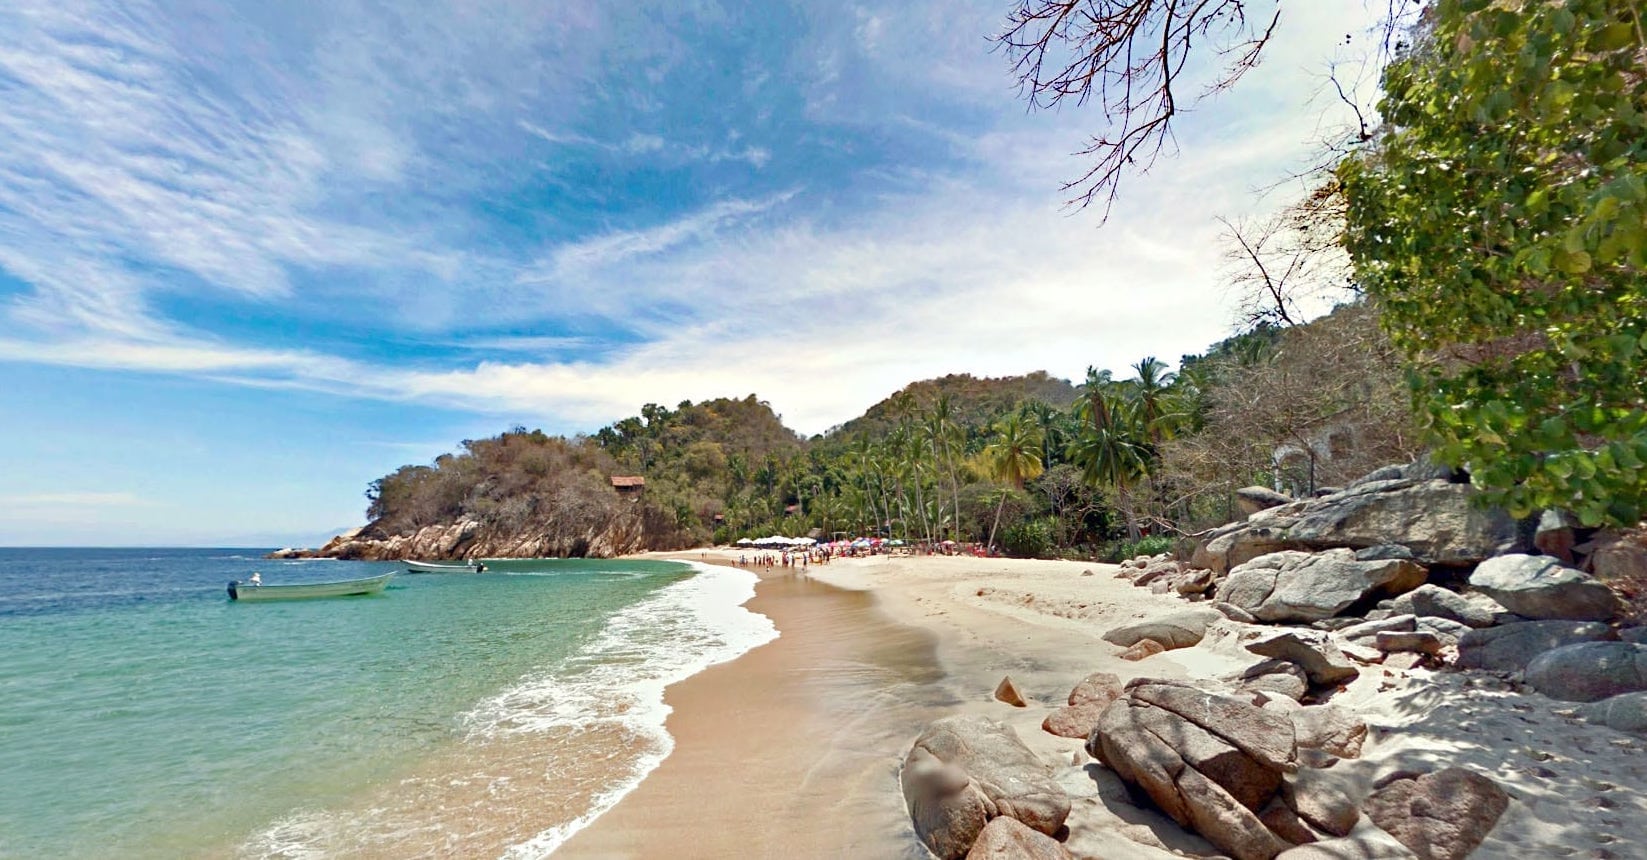 A long a beautiful beach surrounded by jungle